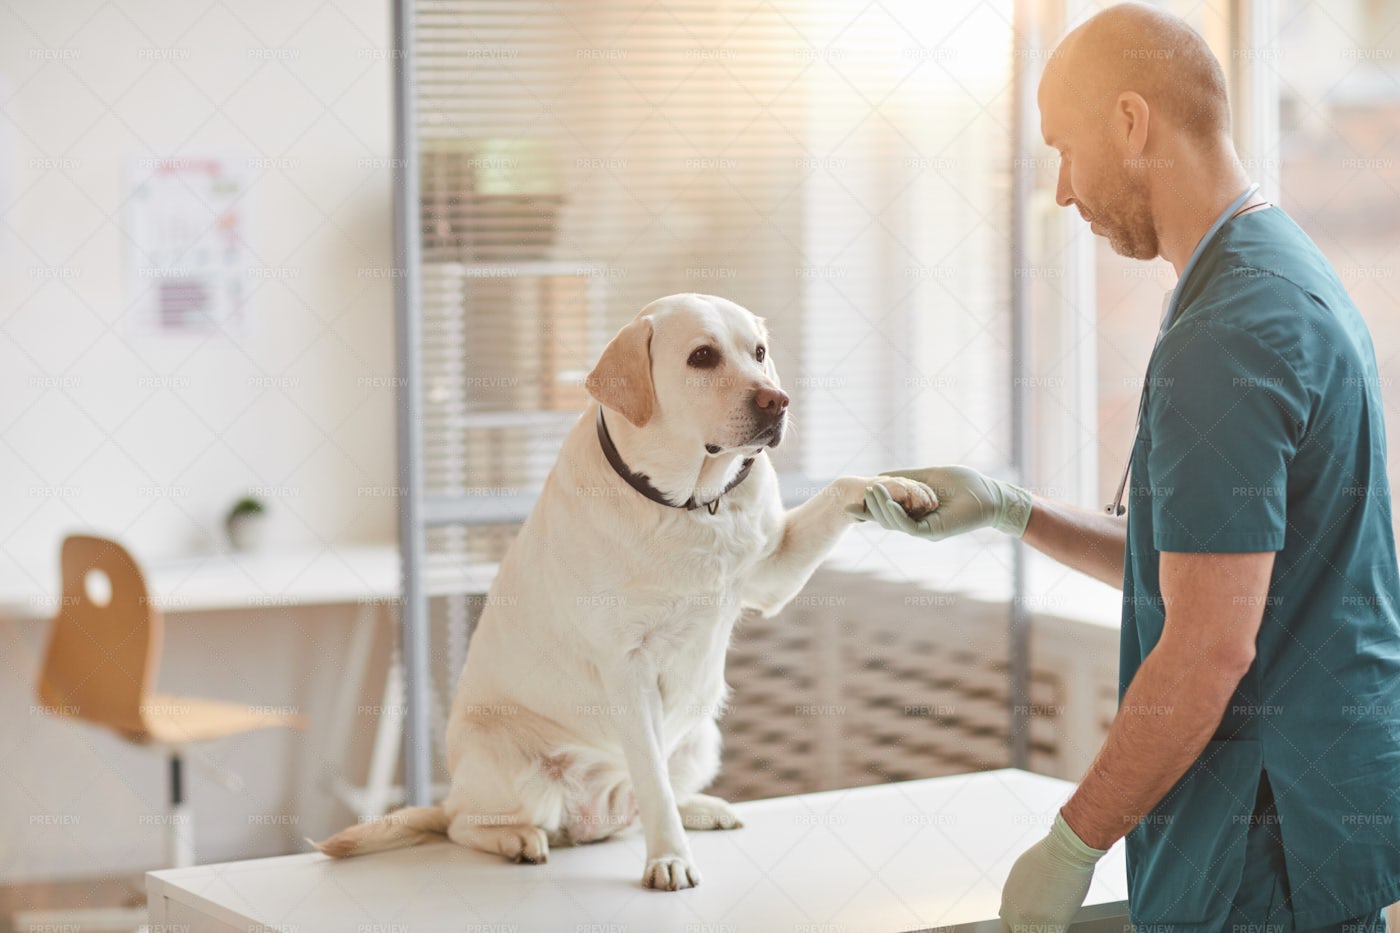 Dog Giving Paw To Doctor: Stock Photos